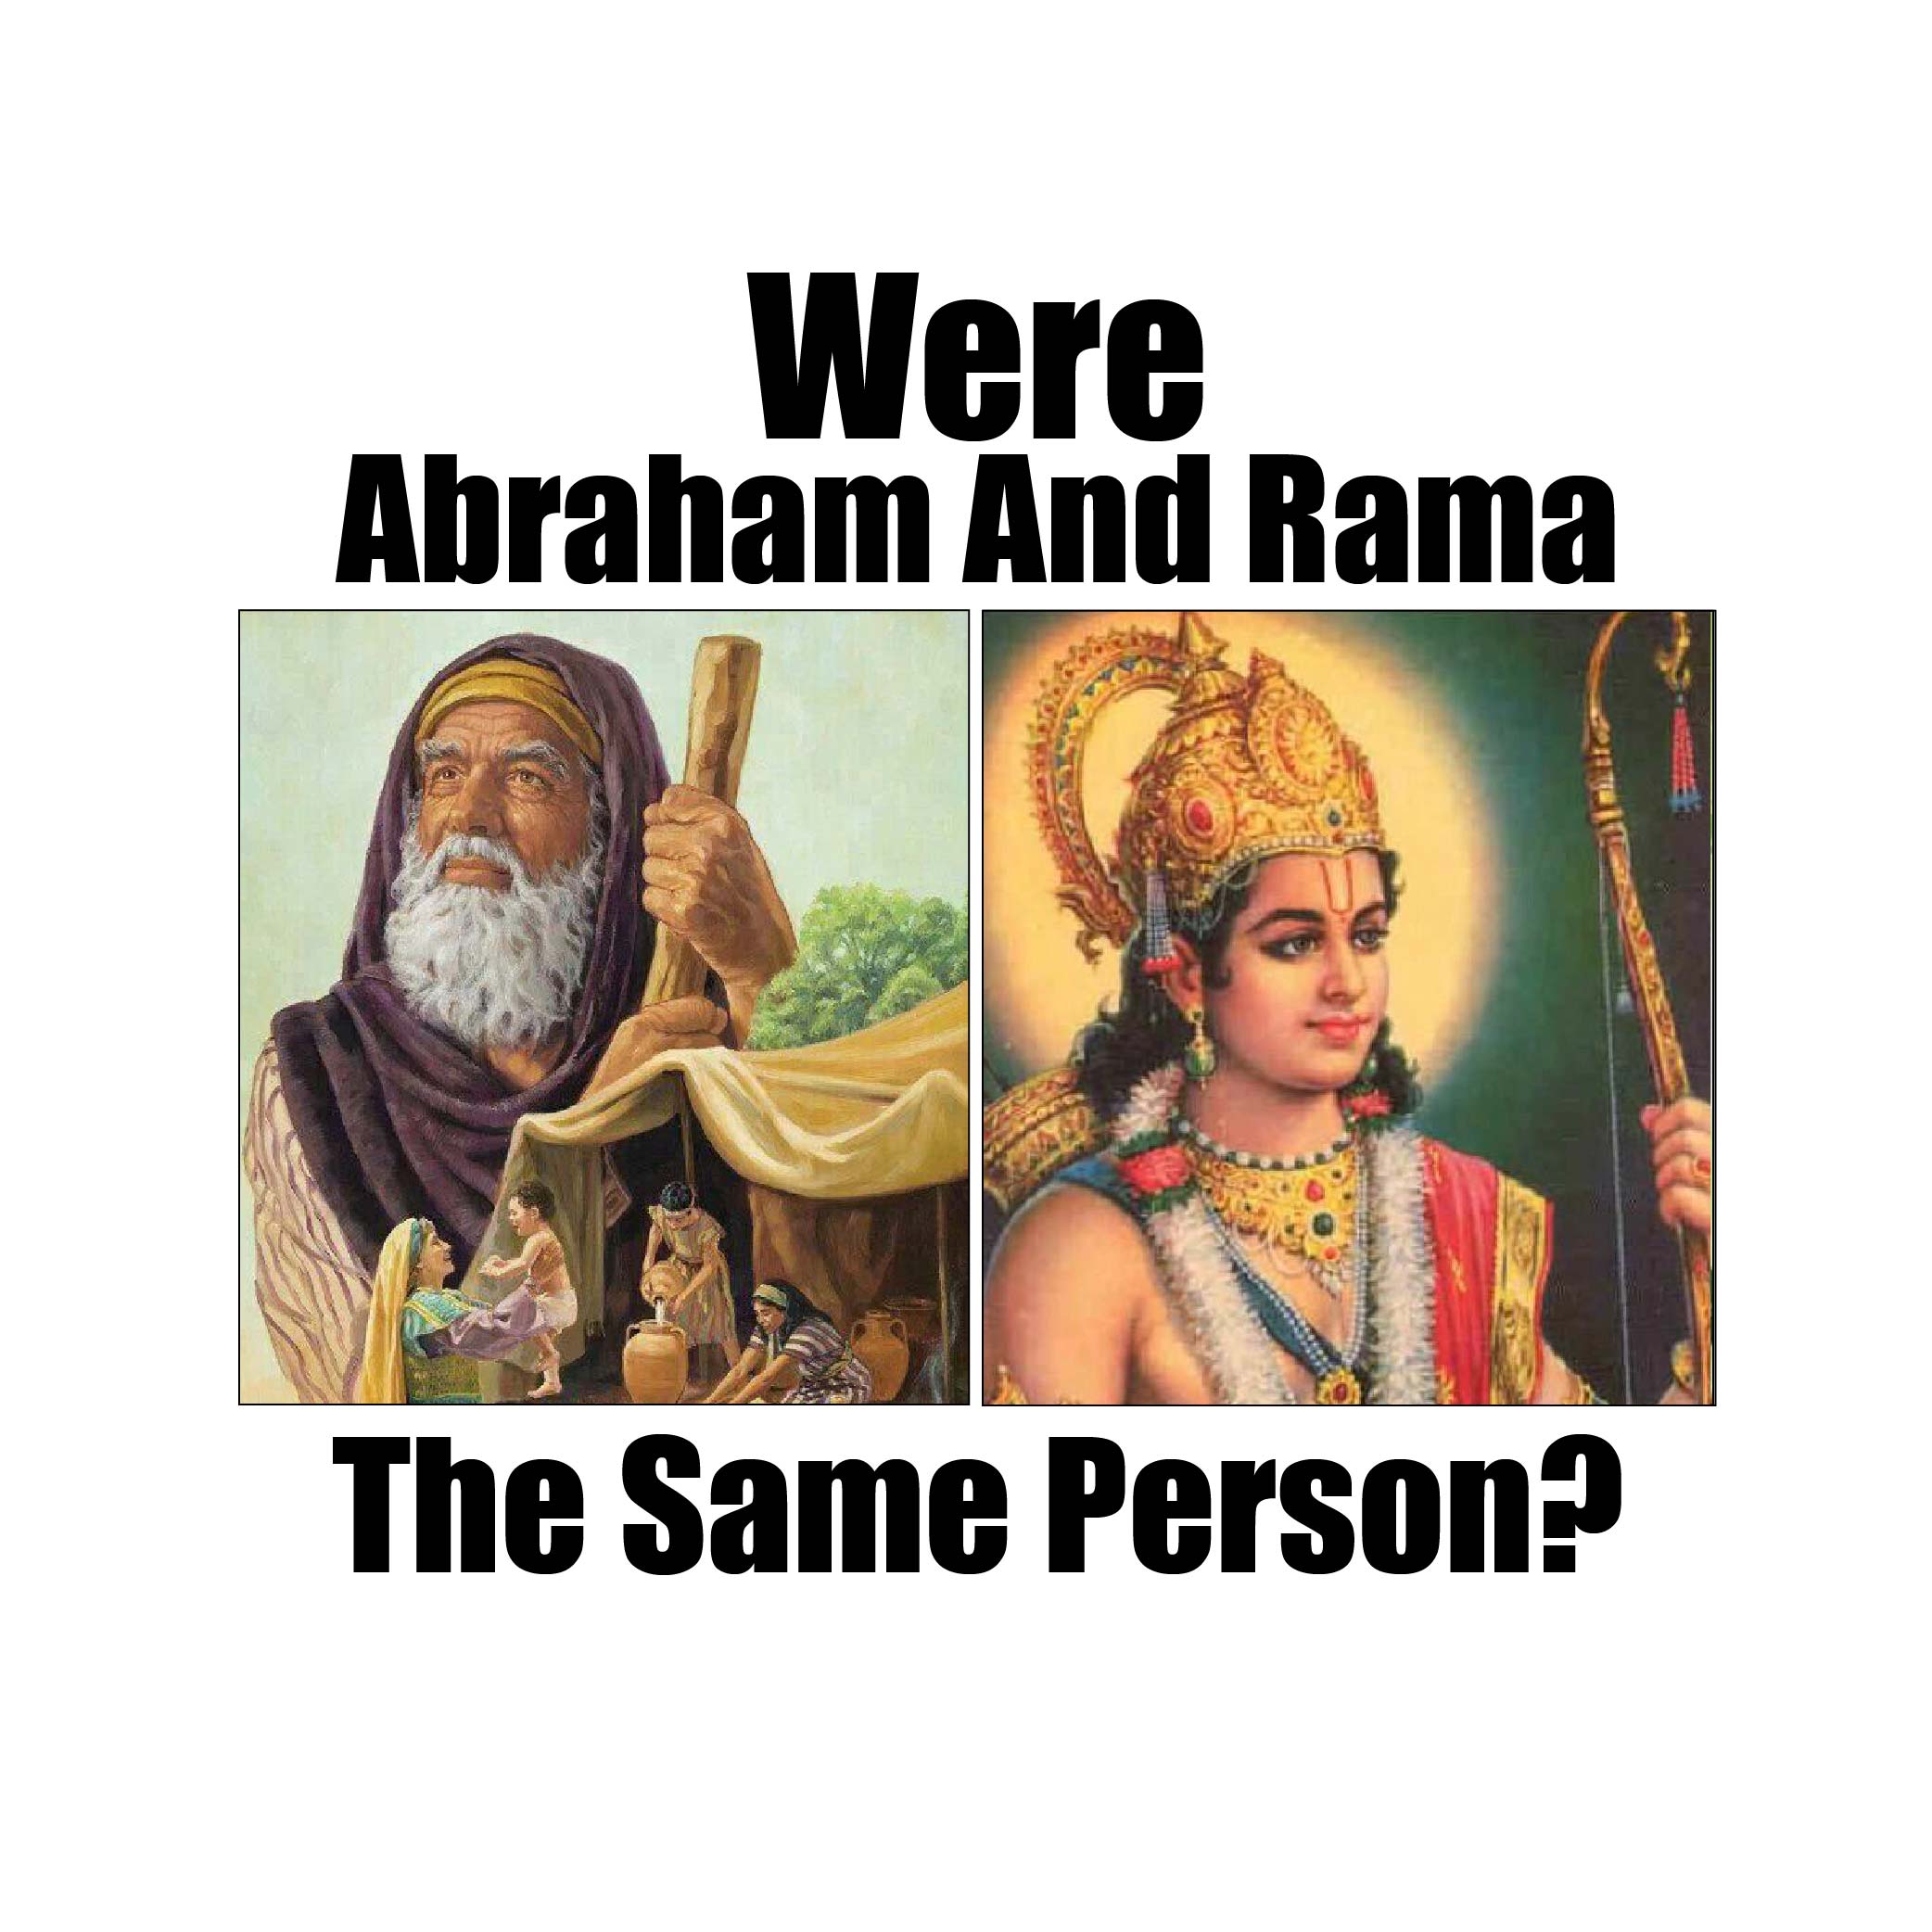 Were Abraham and Rama the same person?